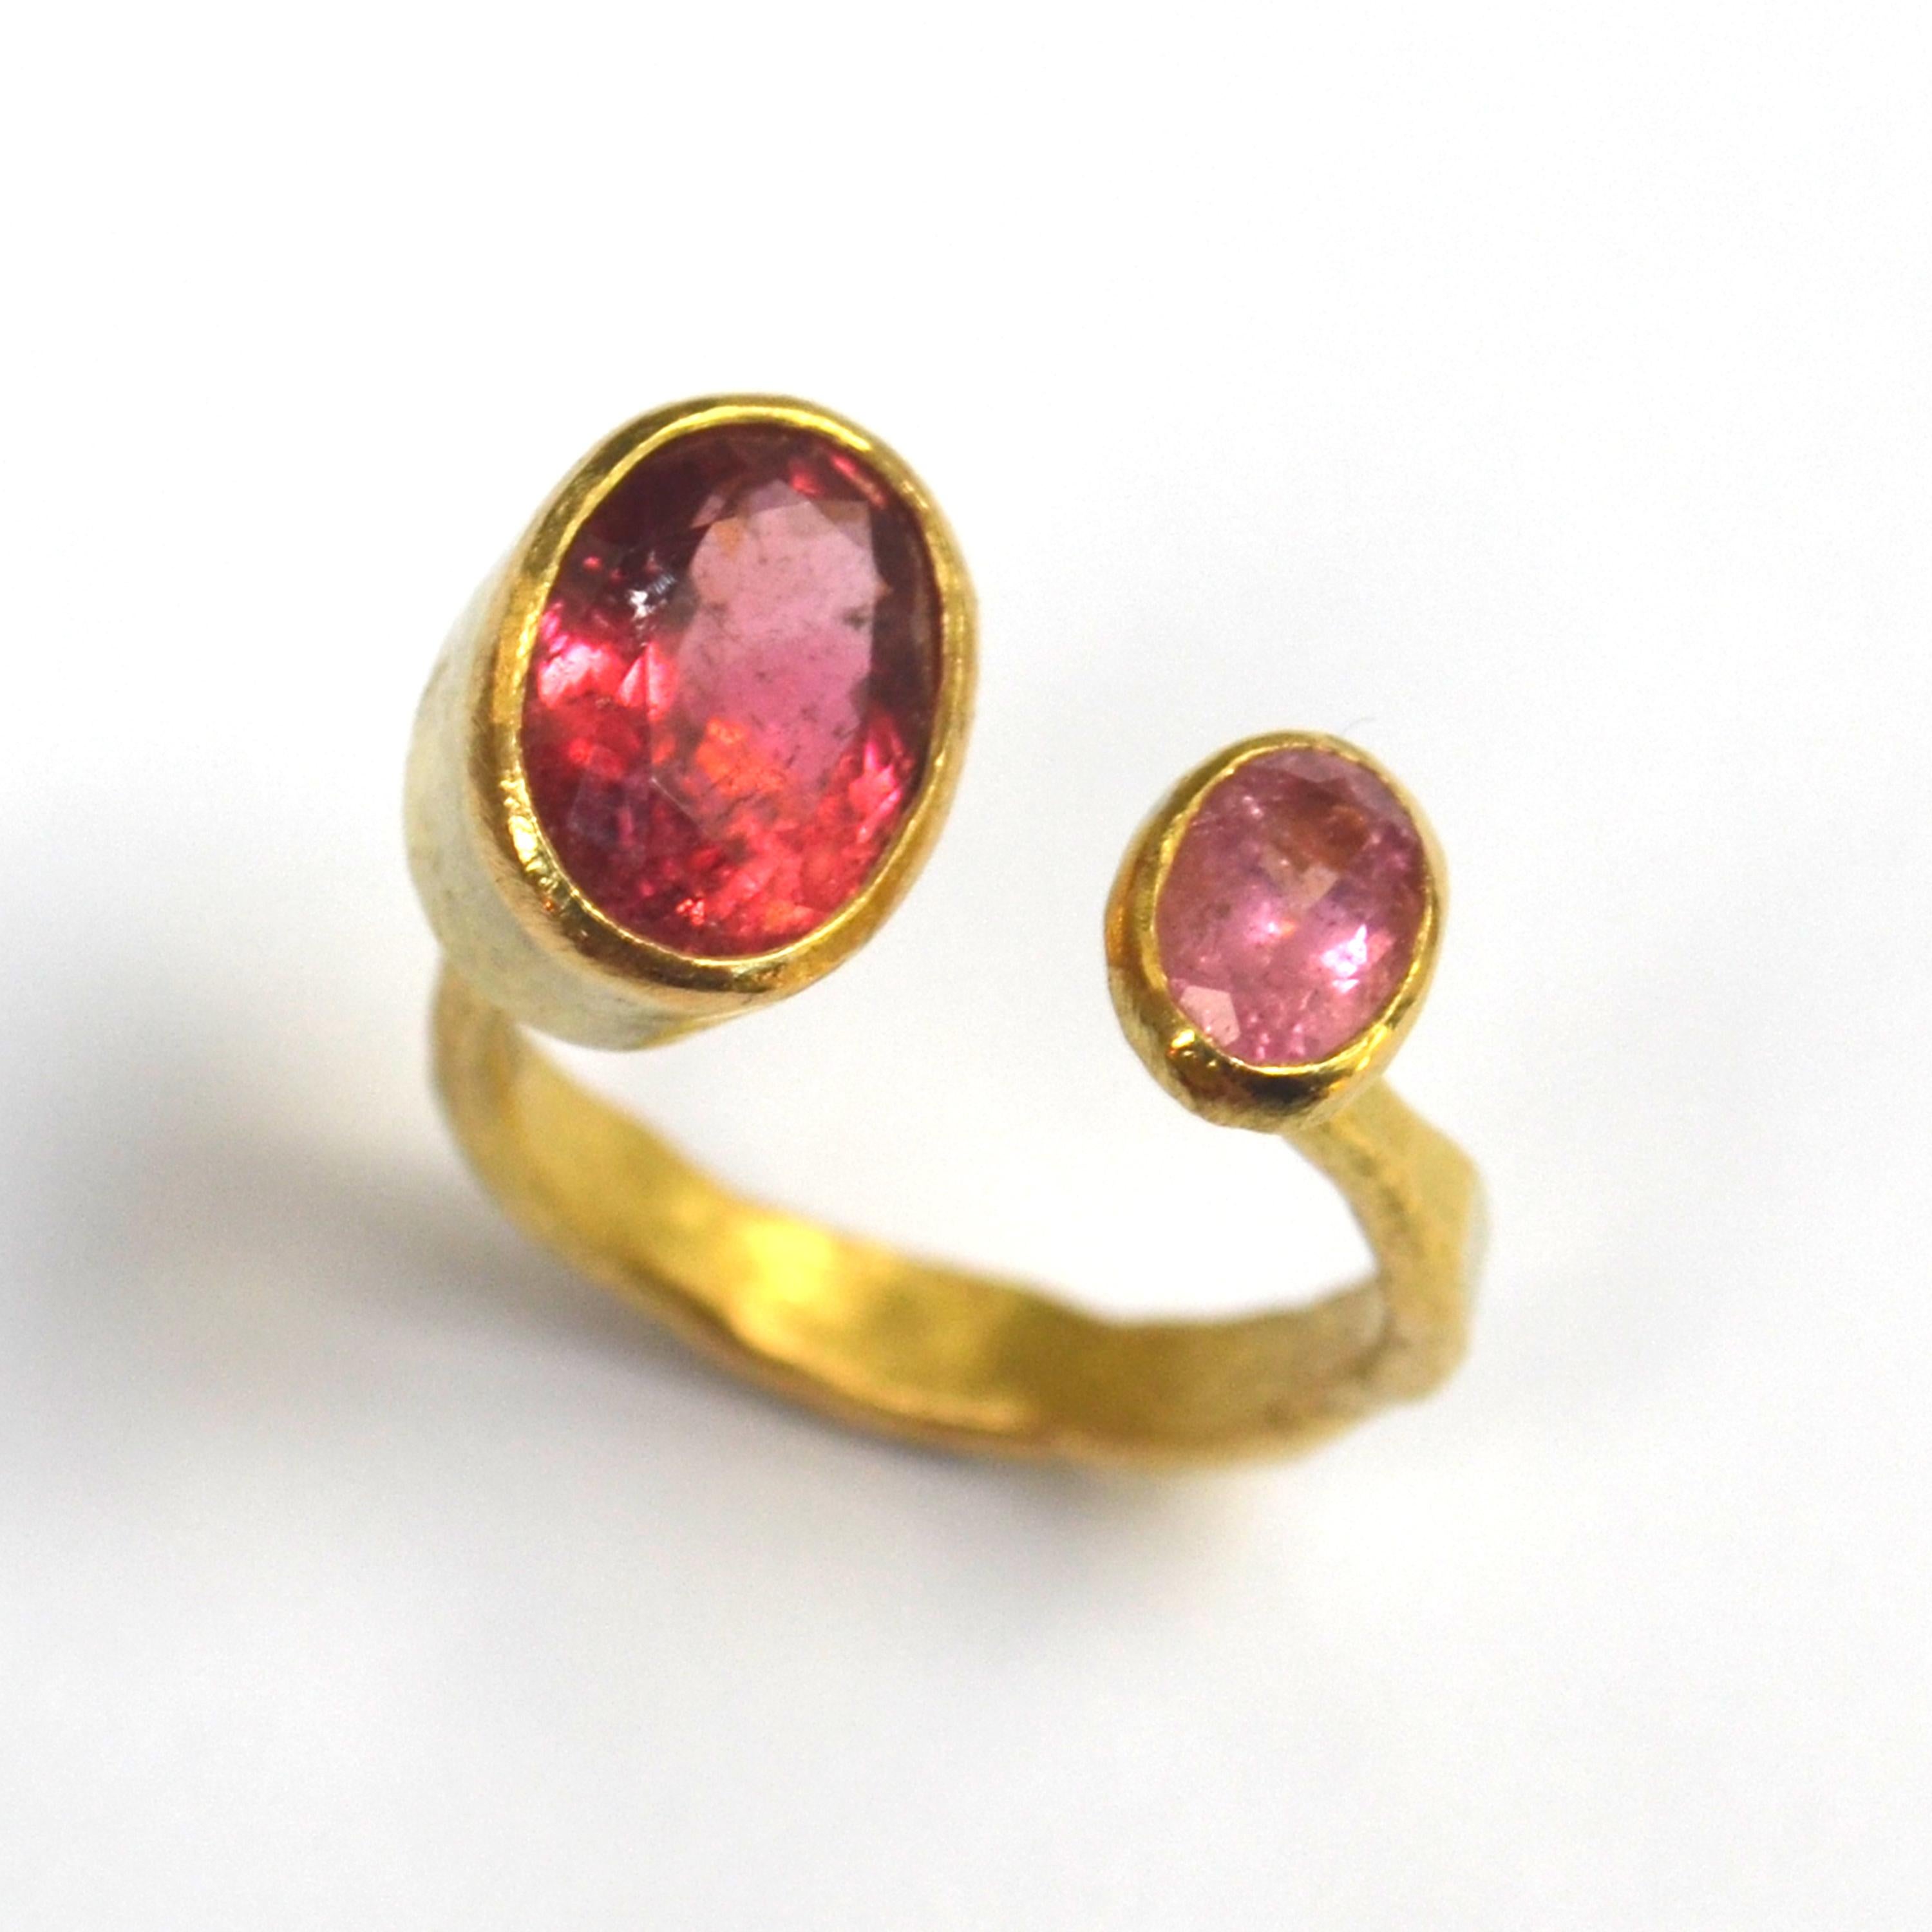 Contemporary Double Pink Tourmaline 18 Karat Gold Handmade Ring by Disa Allsopp For Sale 4